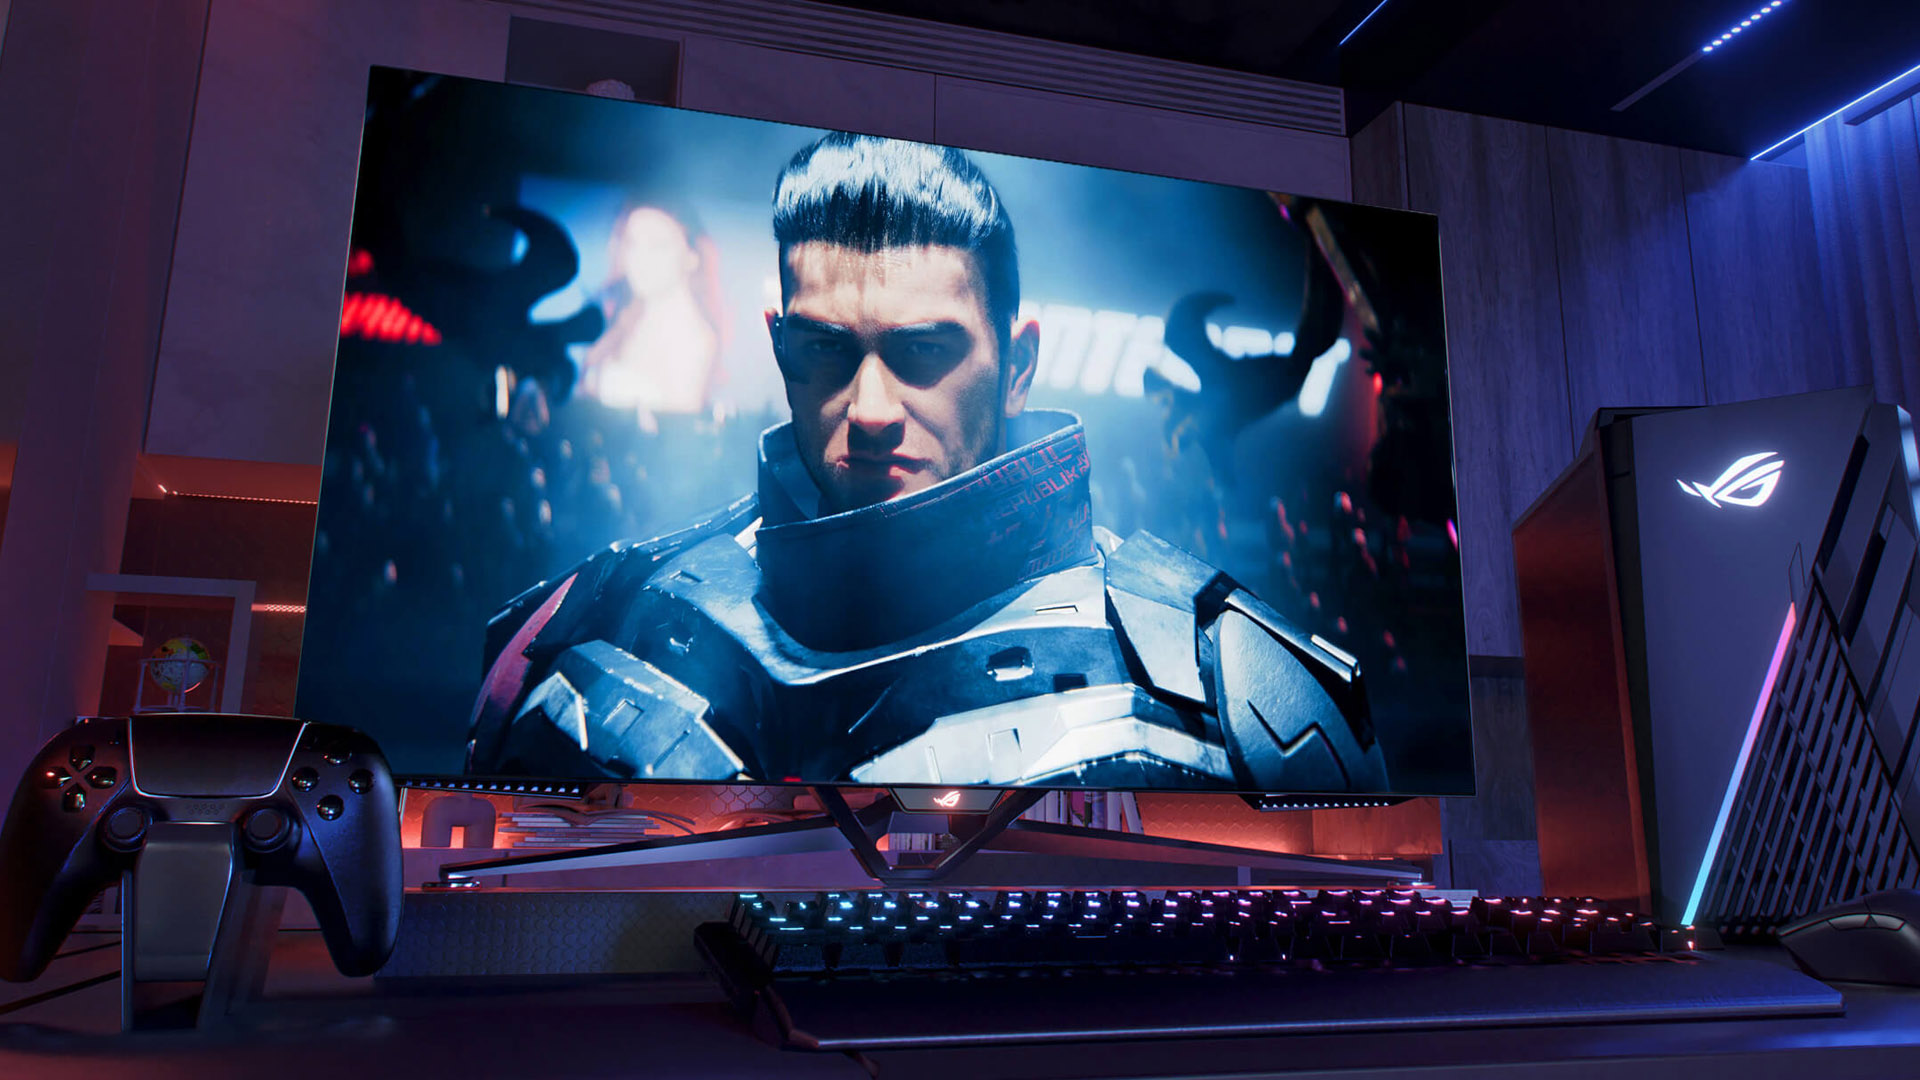 Get a massive 42-inch 4K OLED monitor for $400 off